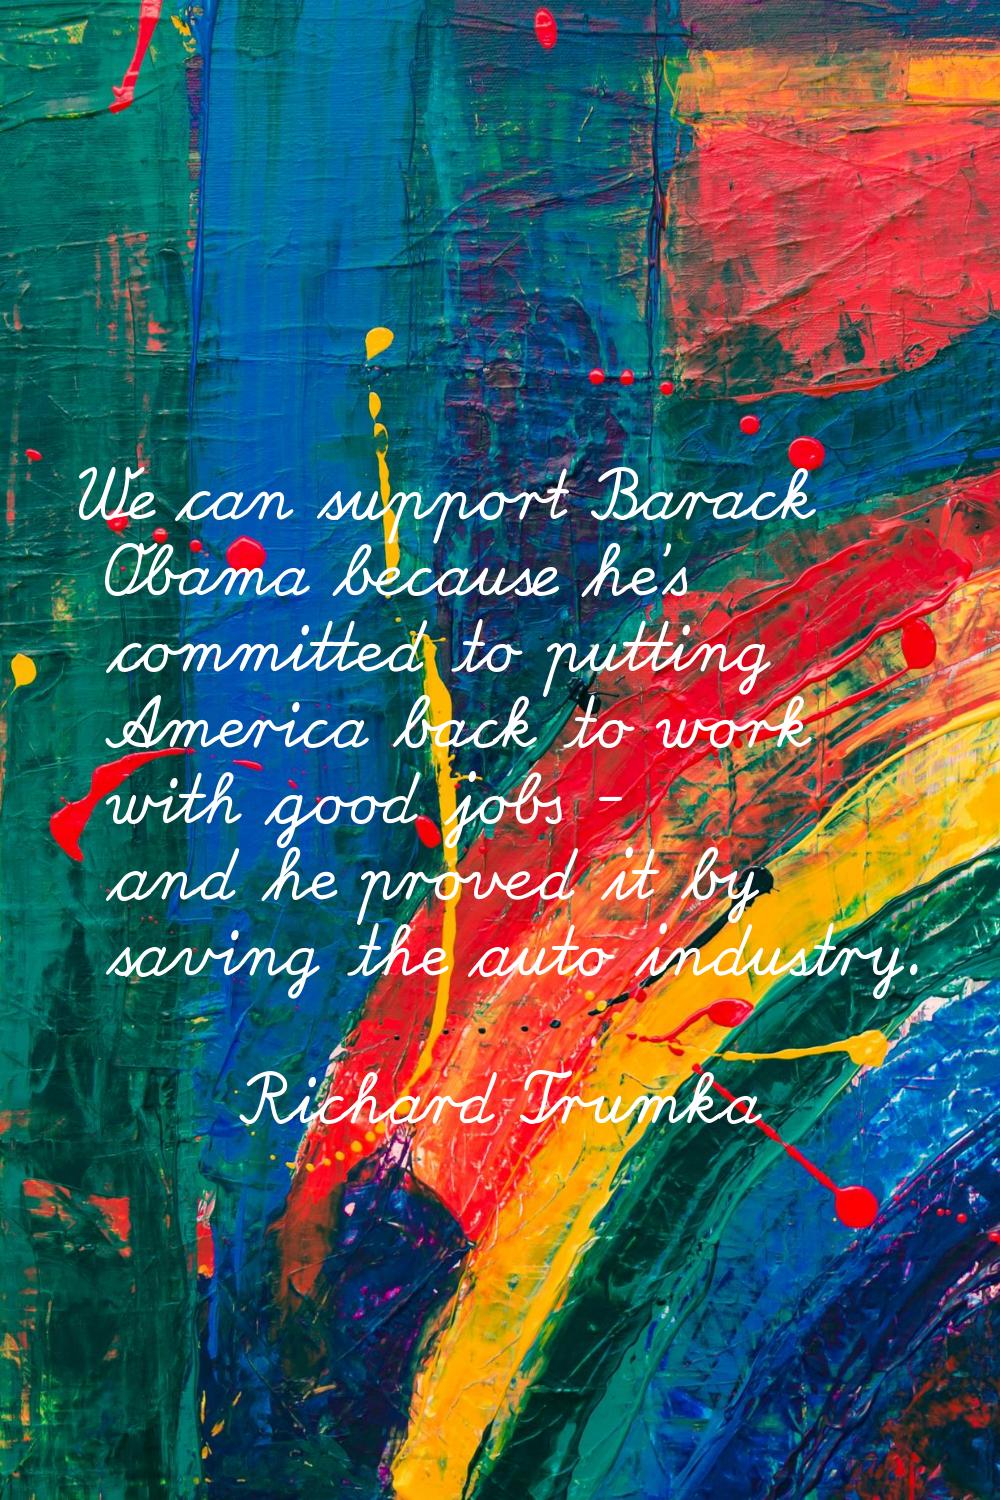 We can support Barack Obama because he's committed to putting America back to work with good jobs -